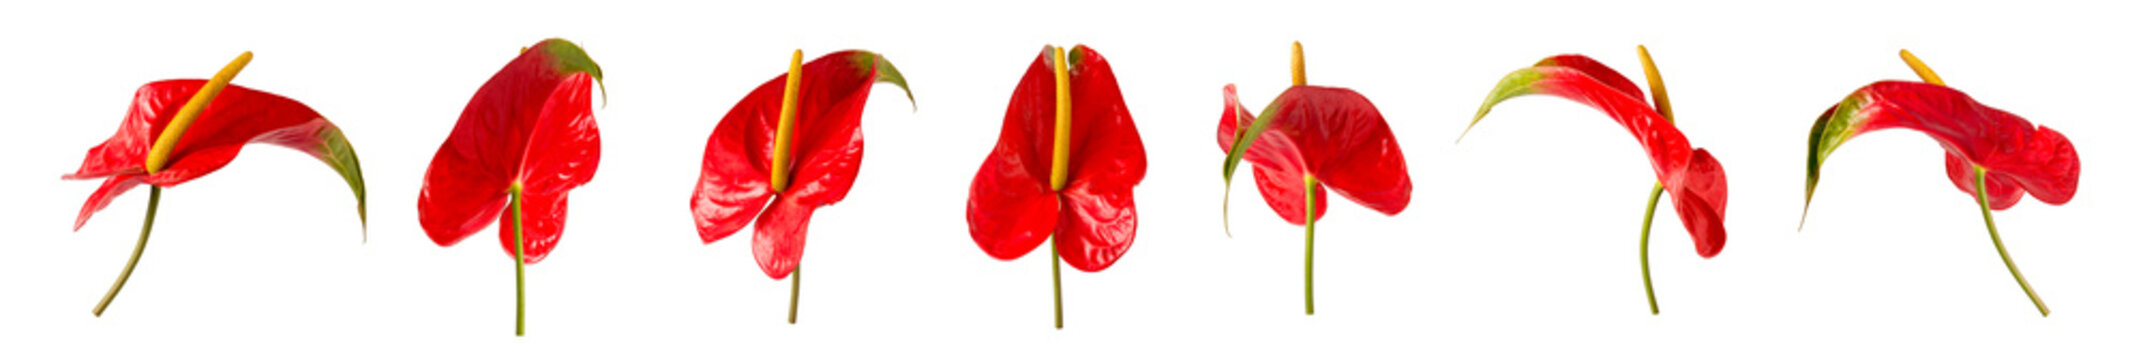 two colors anthurium flowers, also known as tailflower, flamingo and laceleaf, red and green colors flowers isolated on white background, taken in different angles, collection